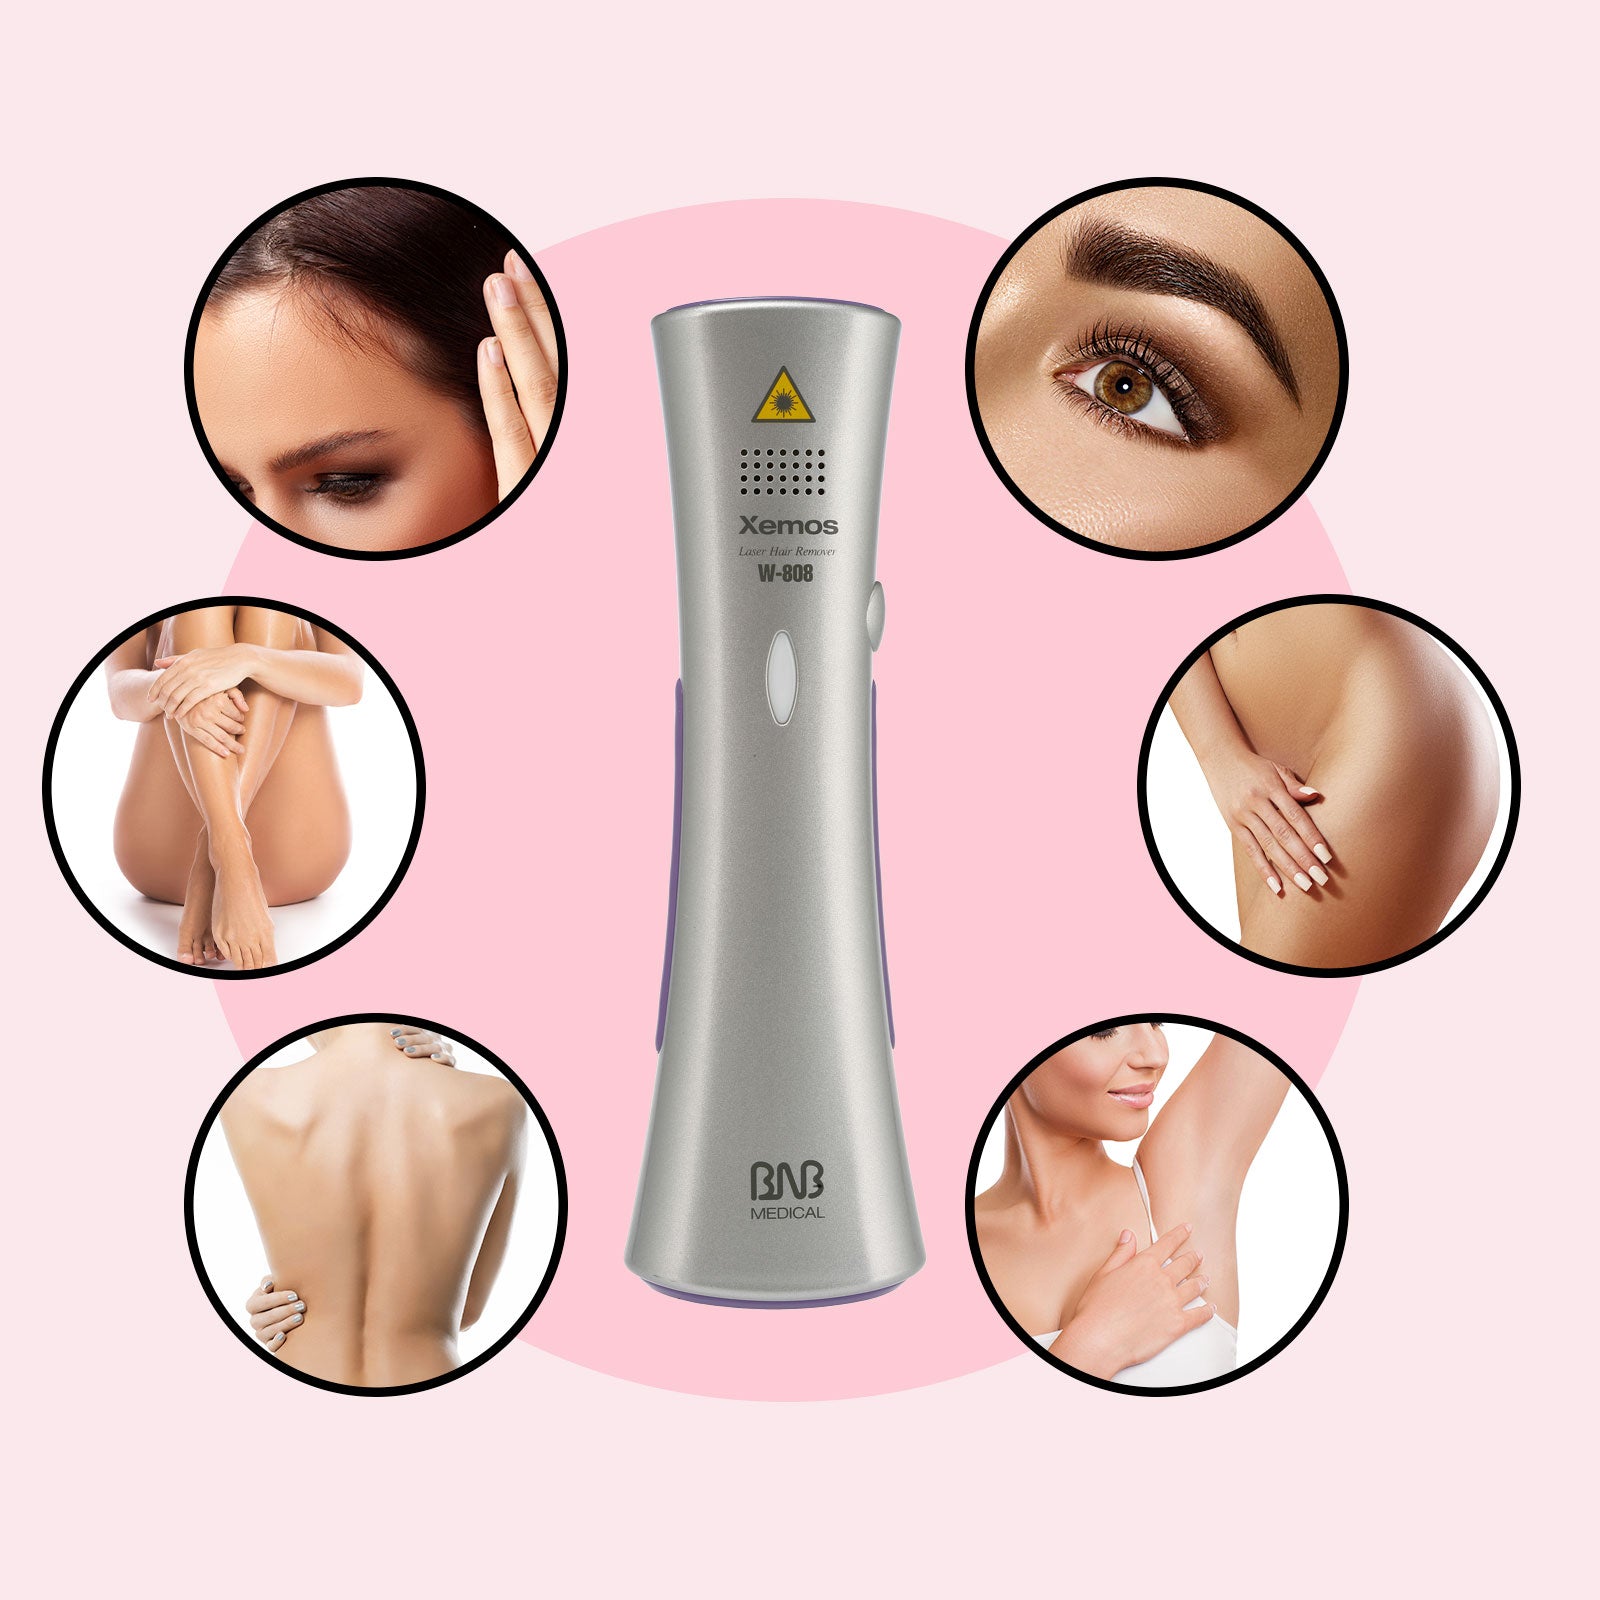 Silhouette Portable Laser Hair Remover Permanent Epliation System Body Face Home - image3